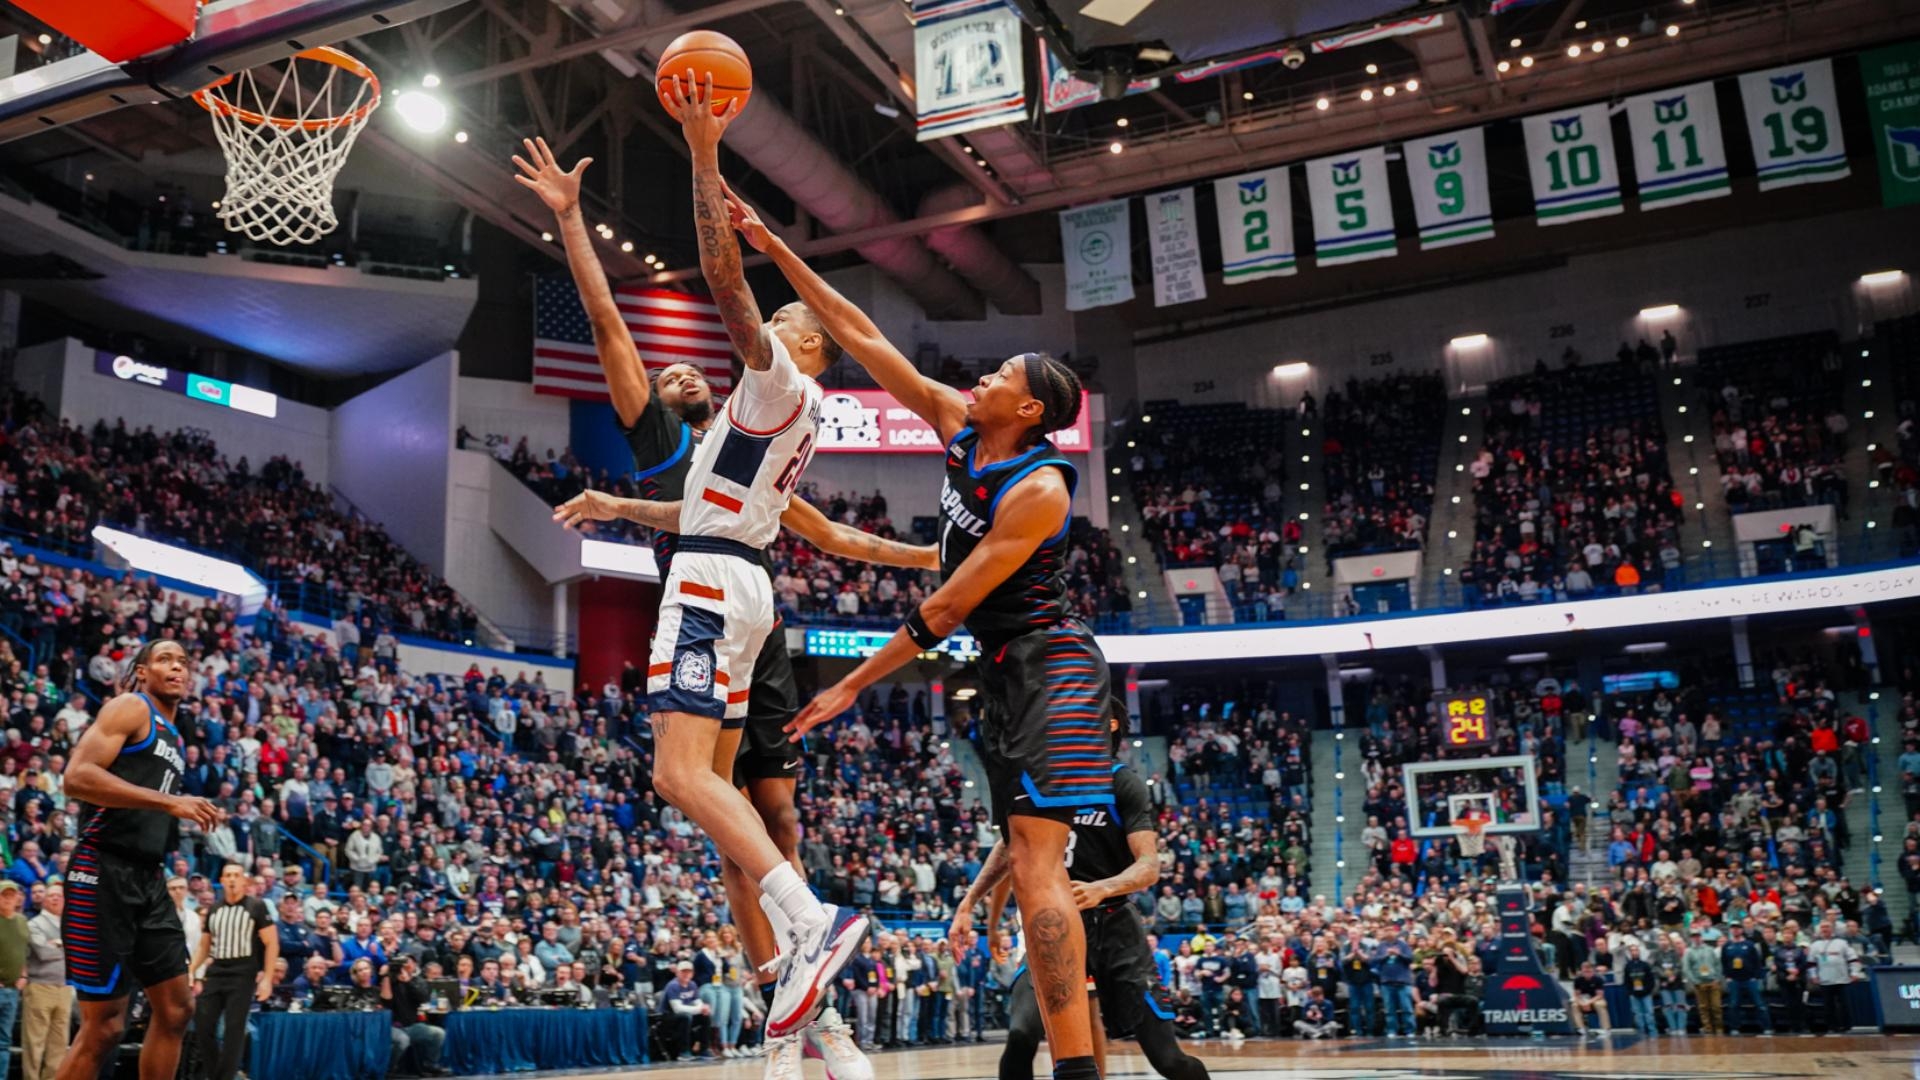 UConn uses early 27-0 run to break game open - Stream the Video